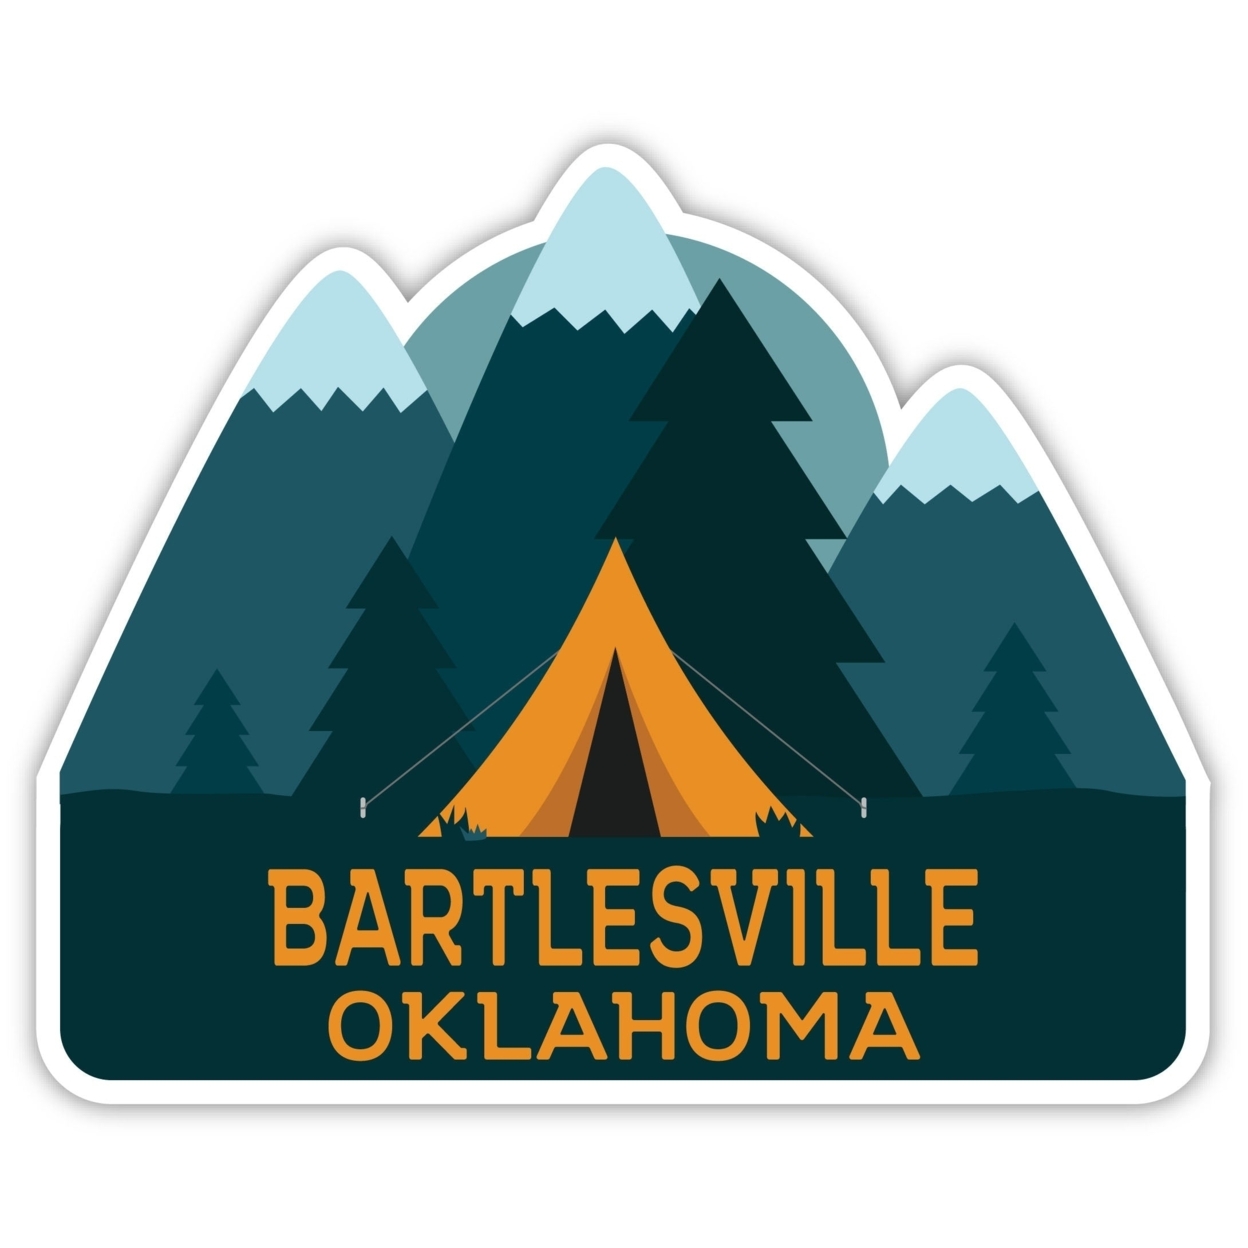 Bartlesville Oklahoma Souvenir Decorative Stickers (Choose Theme And Size) - 4-Pack, 10-Inch, Tent